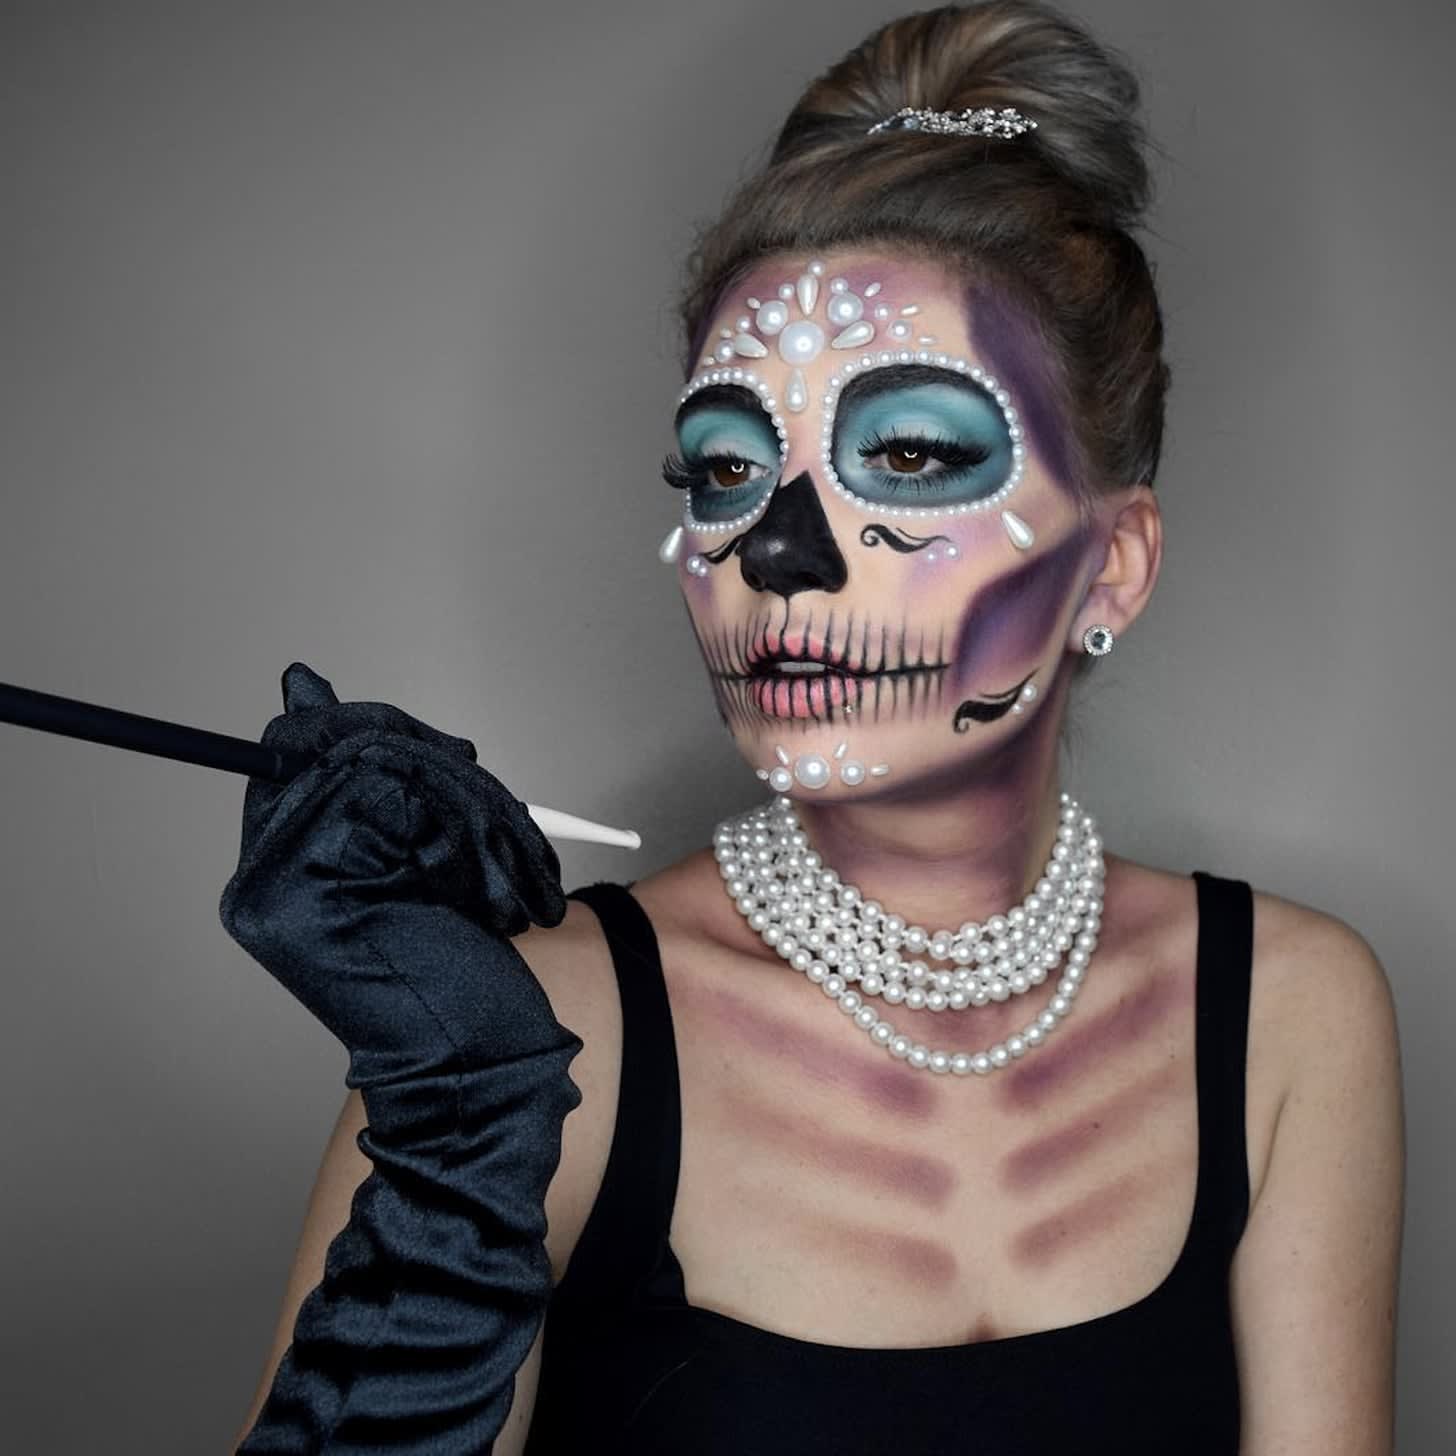 90+ Costumes For Adults to DIY on the Cheap This Halloween